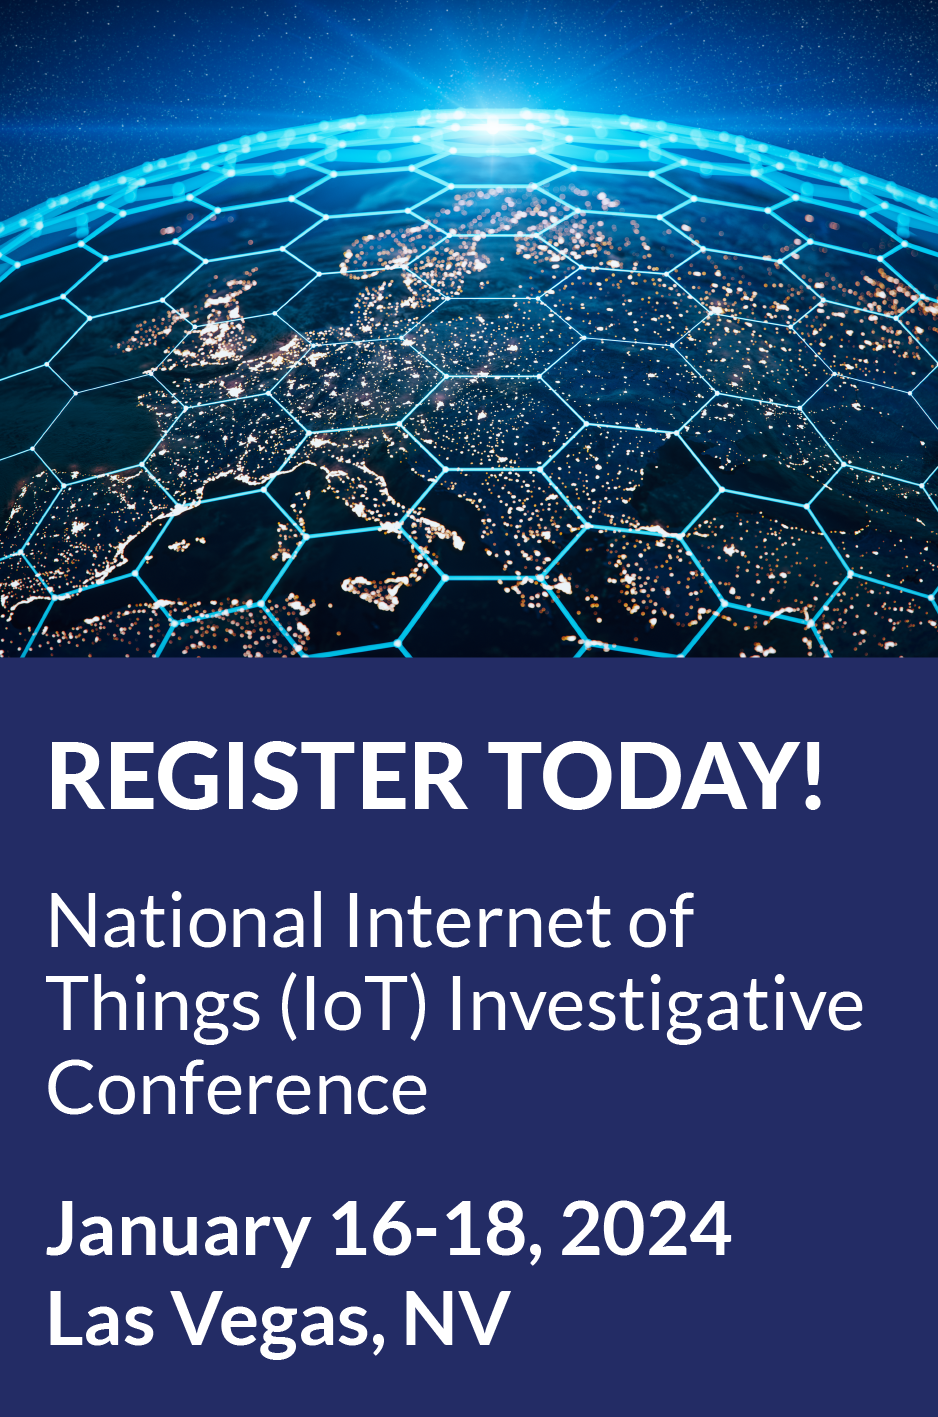 Internet of Things Conference